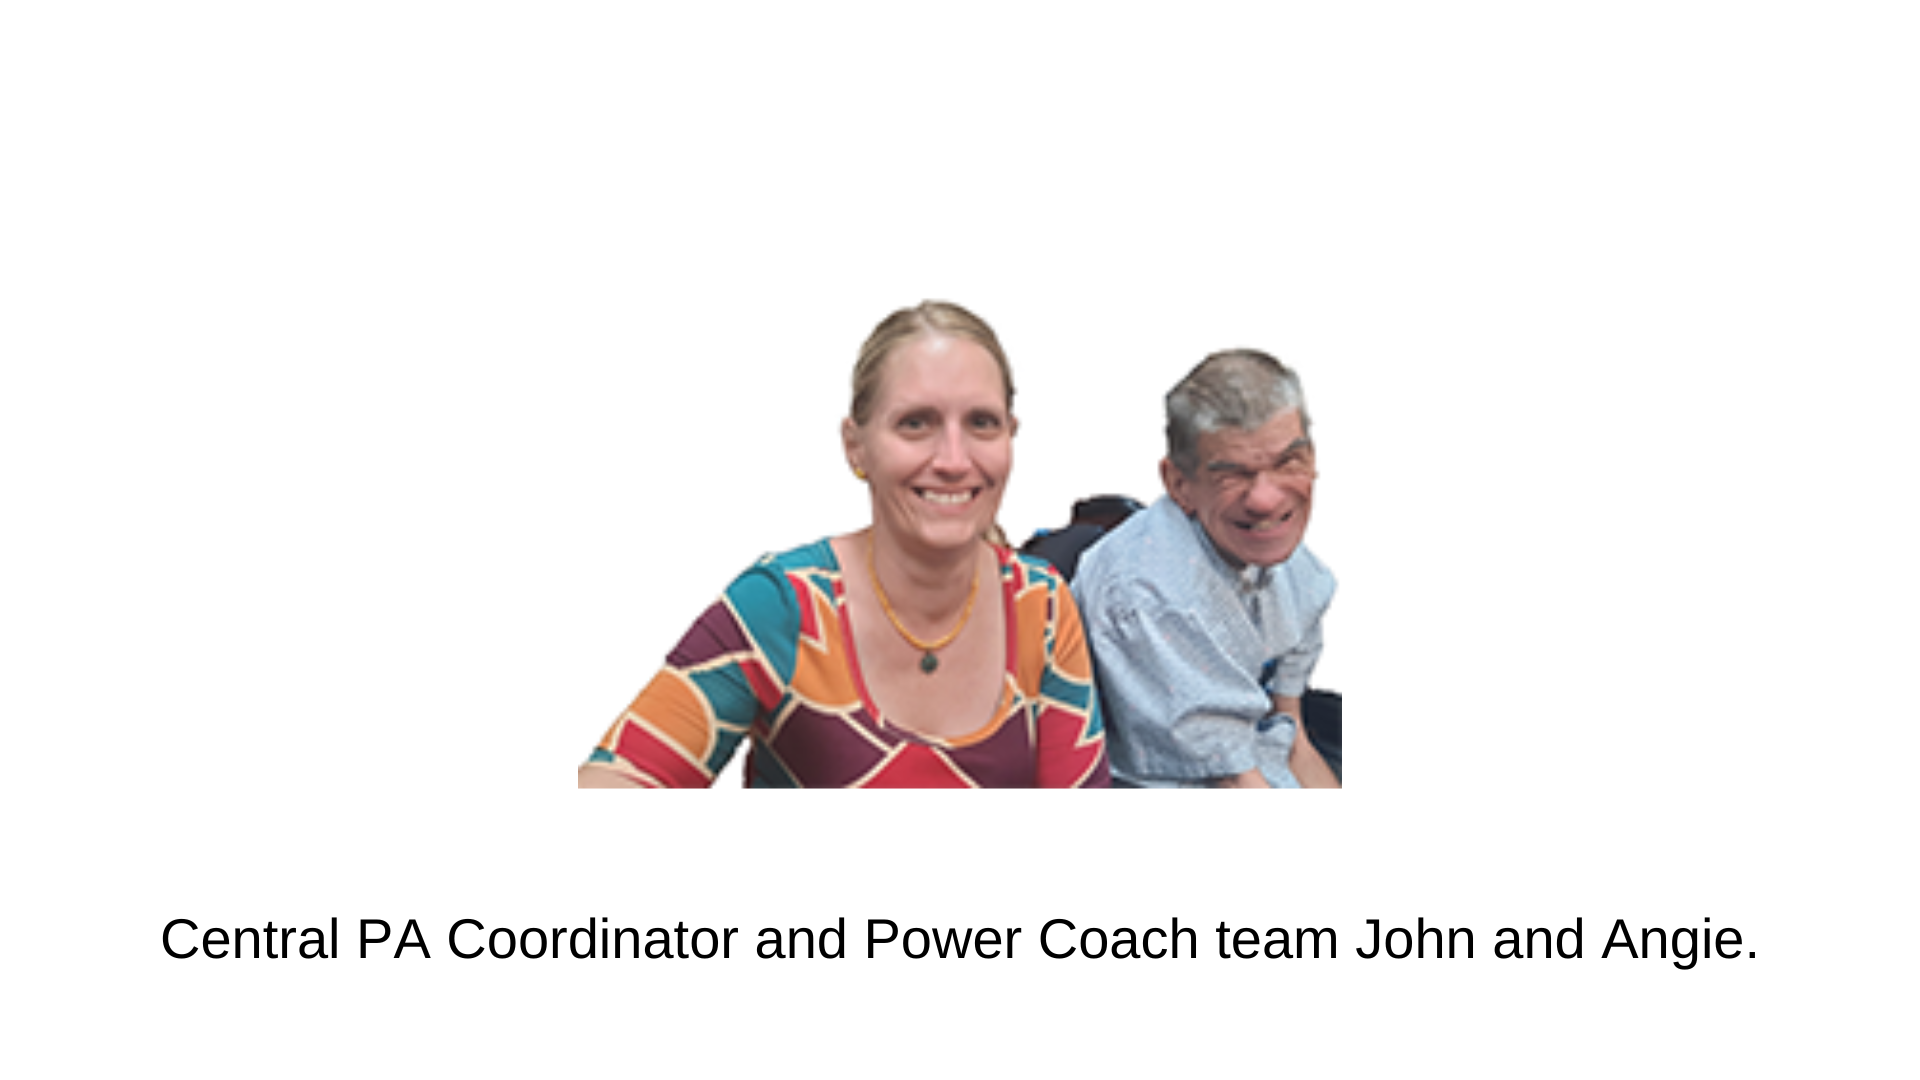 Banner with a photo of two smiling people. One with blonde hair pulled back in a ponytail wearing a bright colored patterned top, and the other with short gray hair wearing a light blue plaid shirt. Text below the photo reads: Central PA Coordinator and Power Coach team Angie and John.